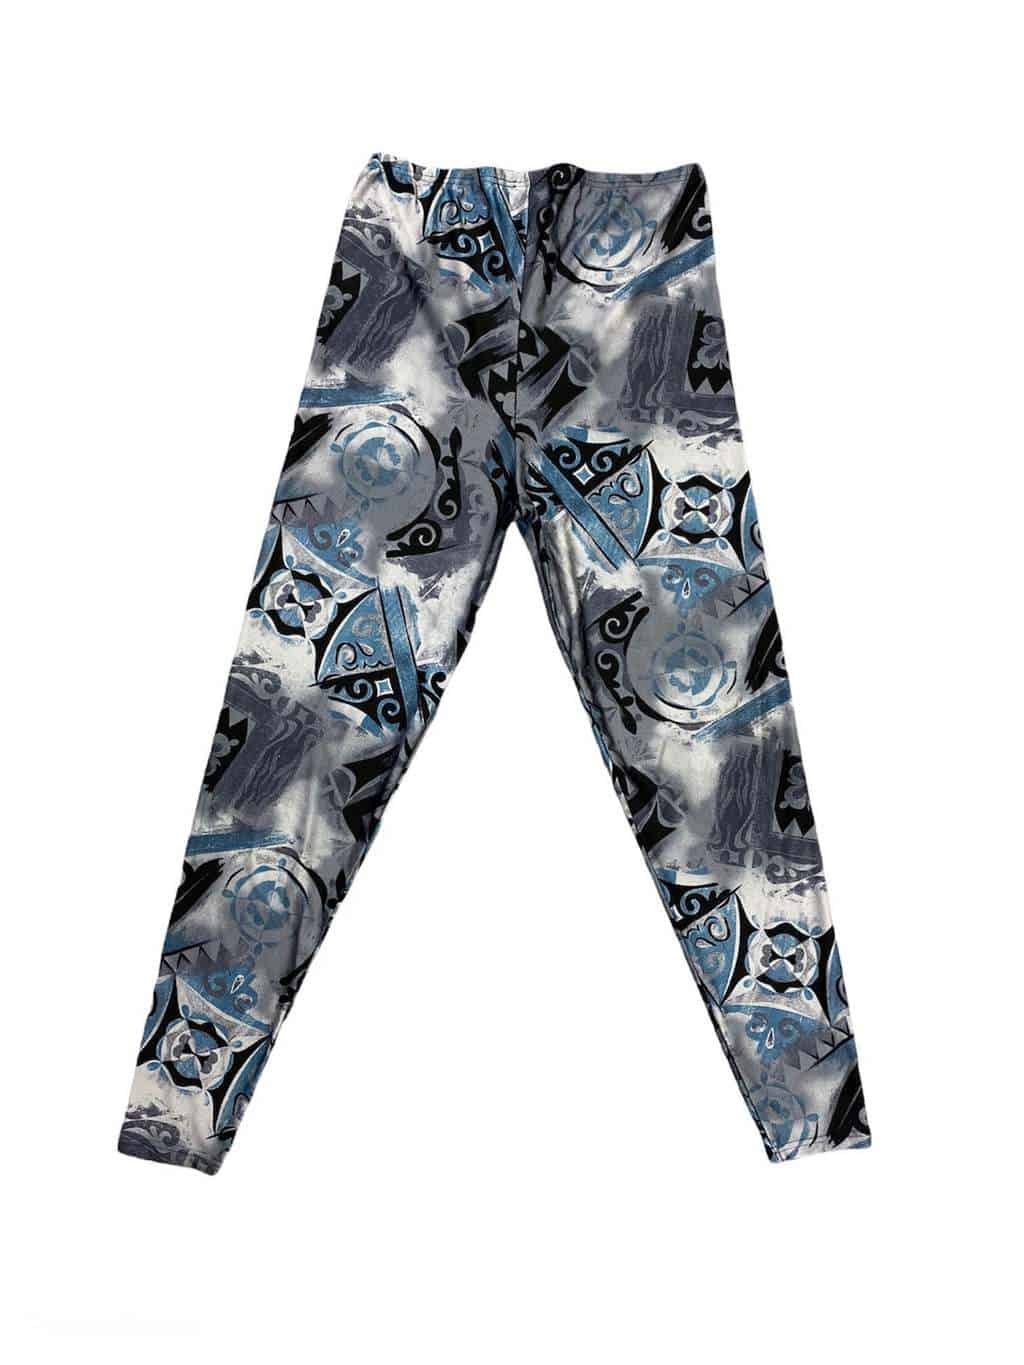 Women's Vintage 80s Abstract Patterned Full Length Sports Leggings in  Silver and Blue - M / L - St Cyr Vintage